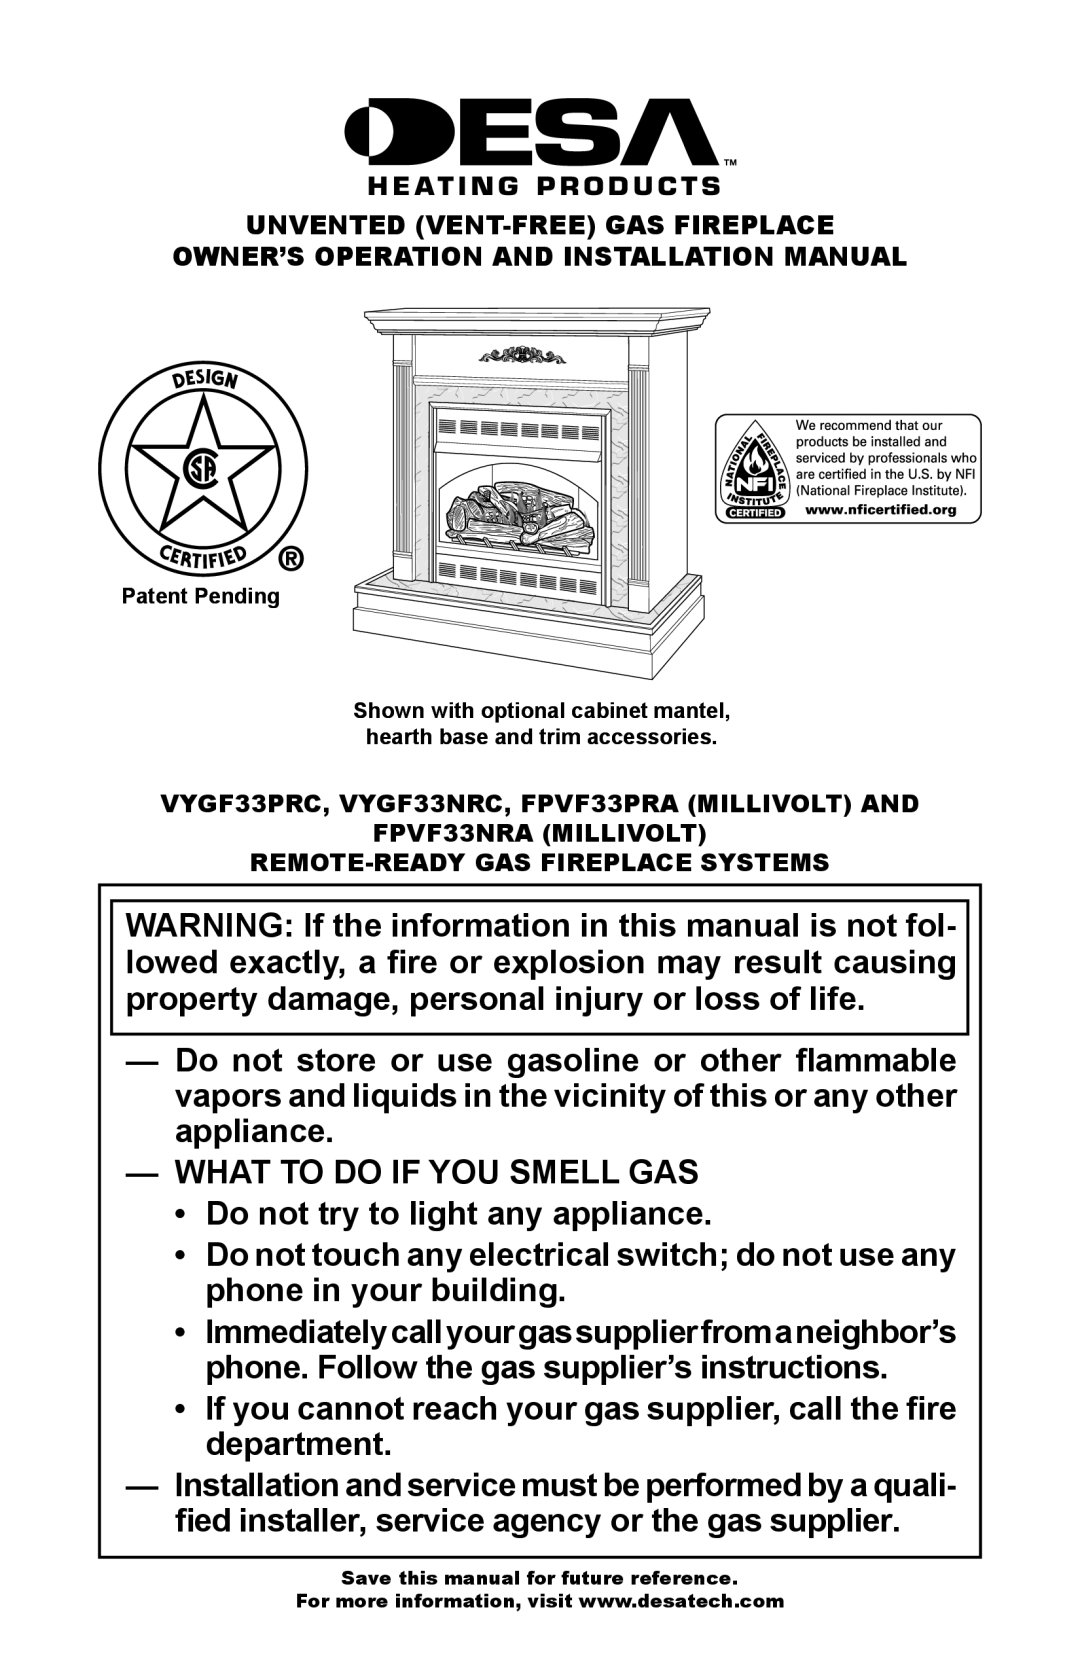 Desa VYGF33PRC installation manual What To Do If You Smell Gas 